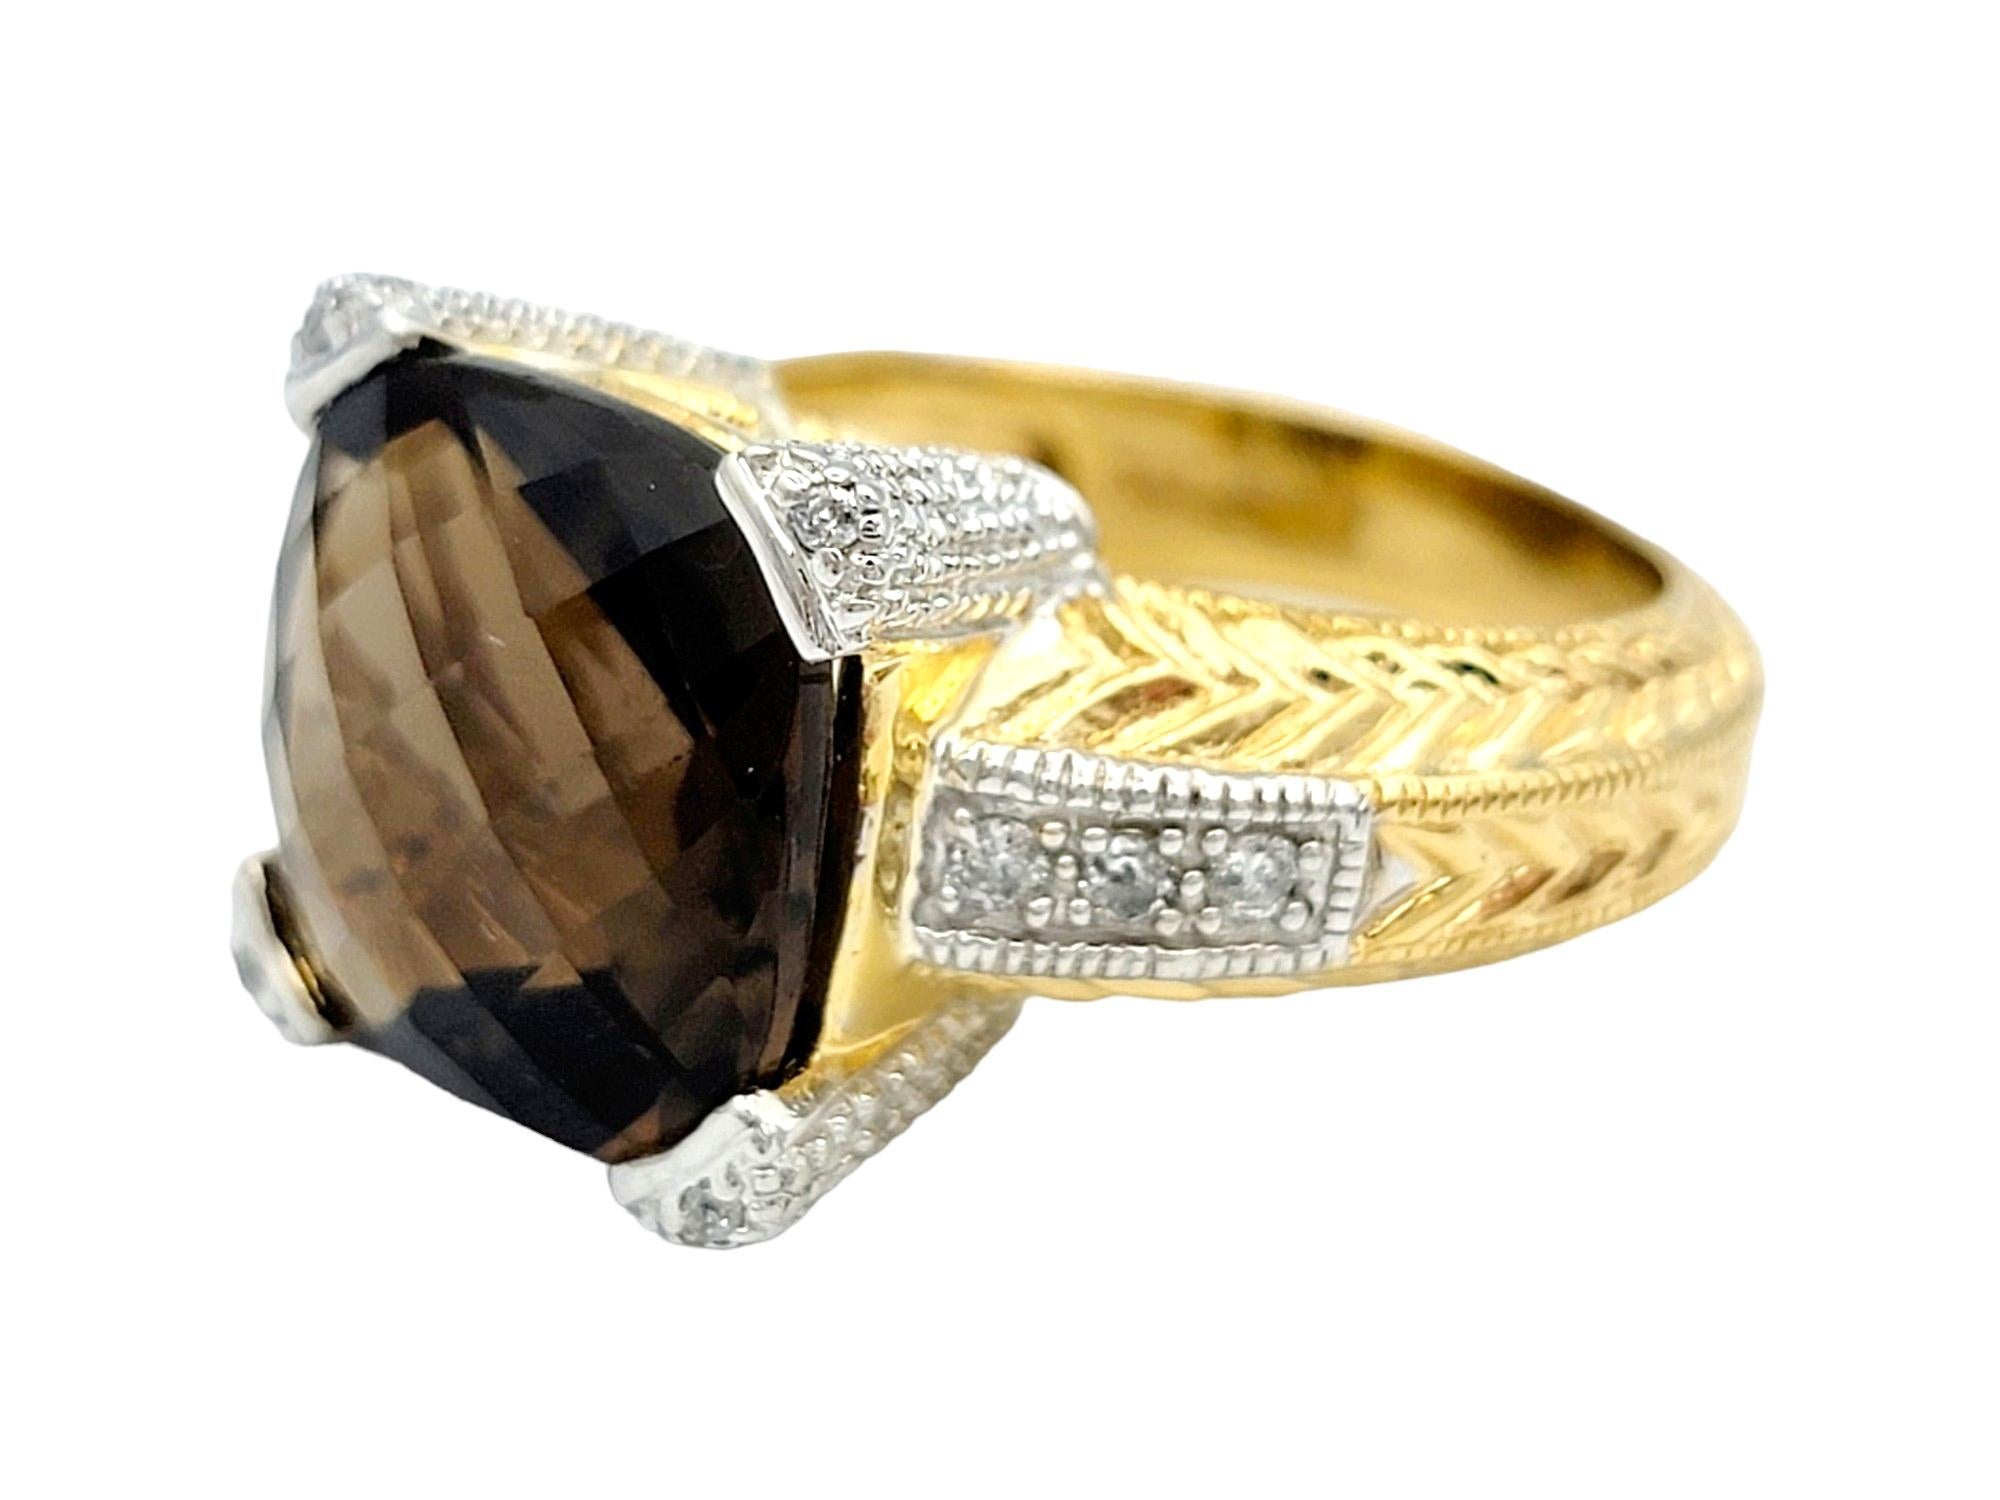 4.55 Carat Total Cushion Cut Smoky Quartz and Diamond Ring 14 Karat Yellow Gold  In Good Condition For Sale In Scottsdale, AZ